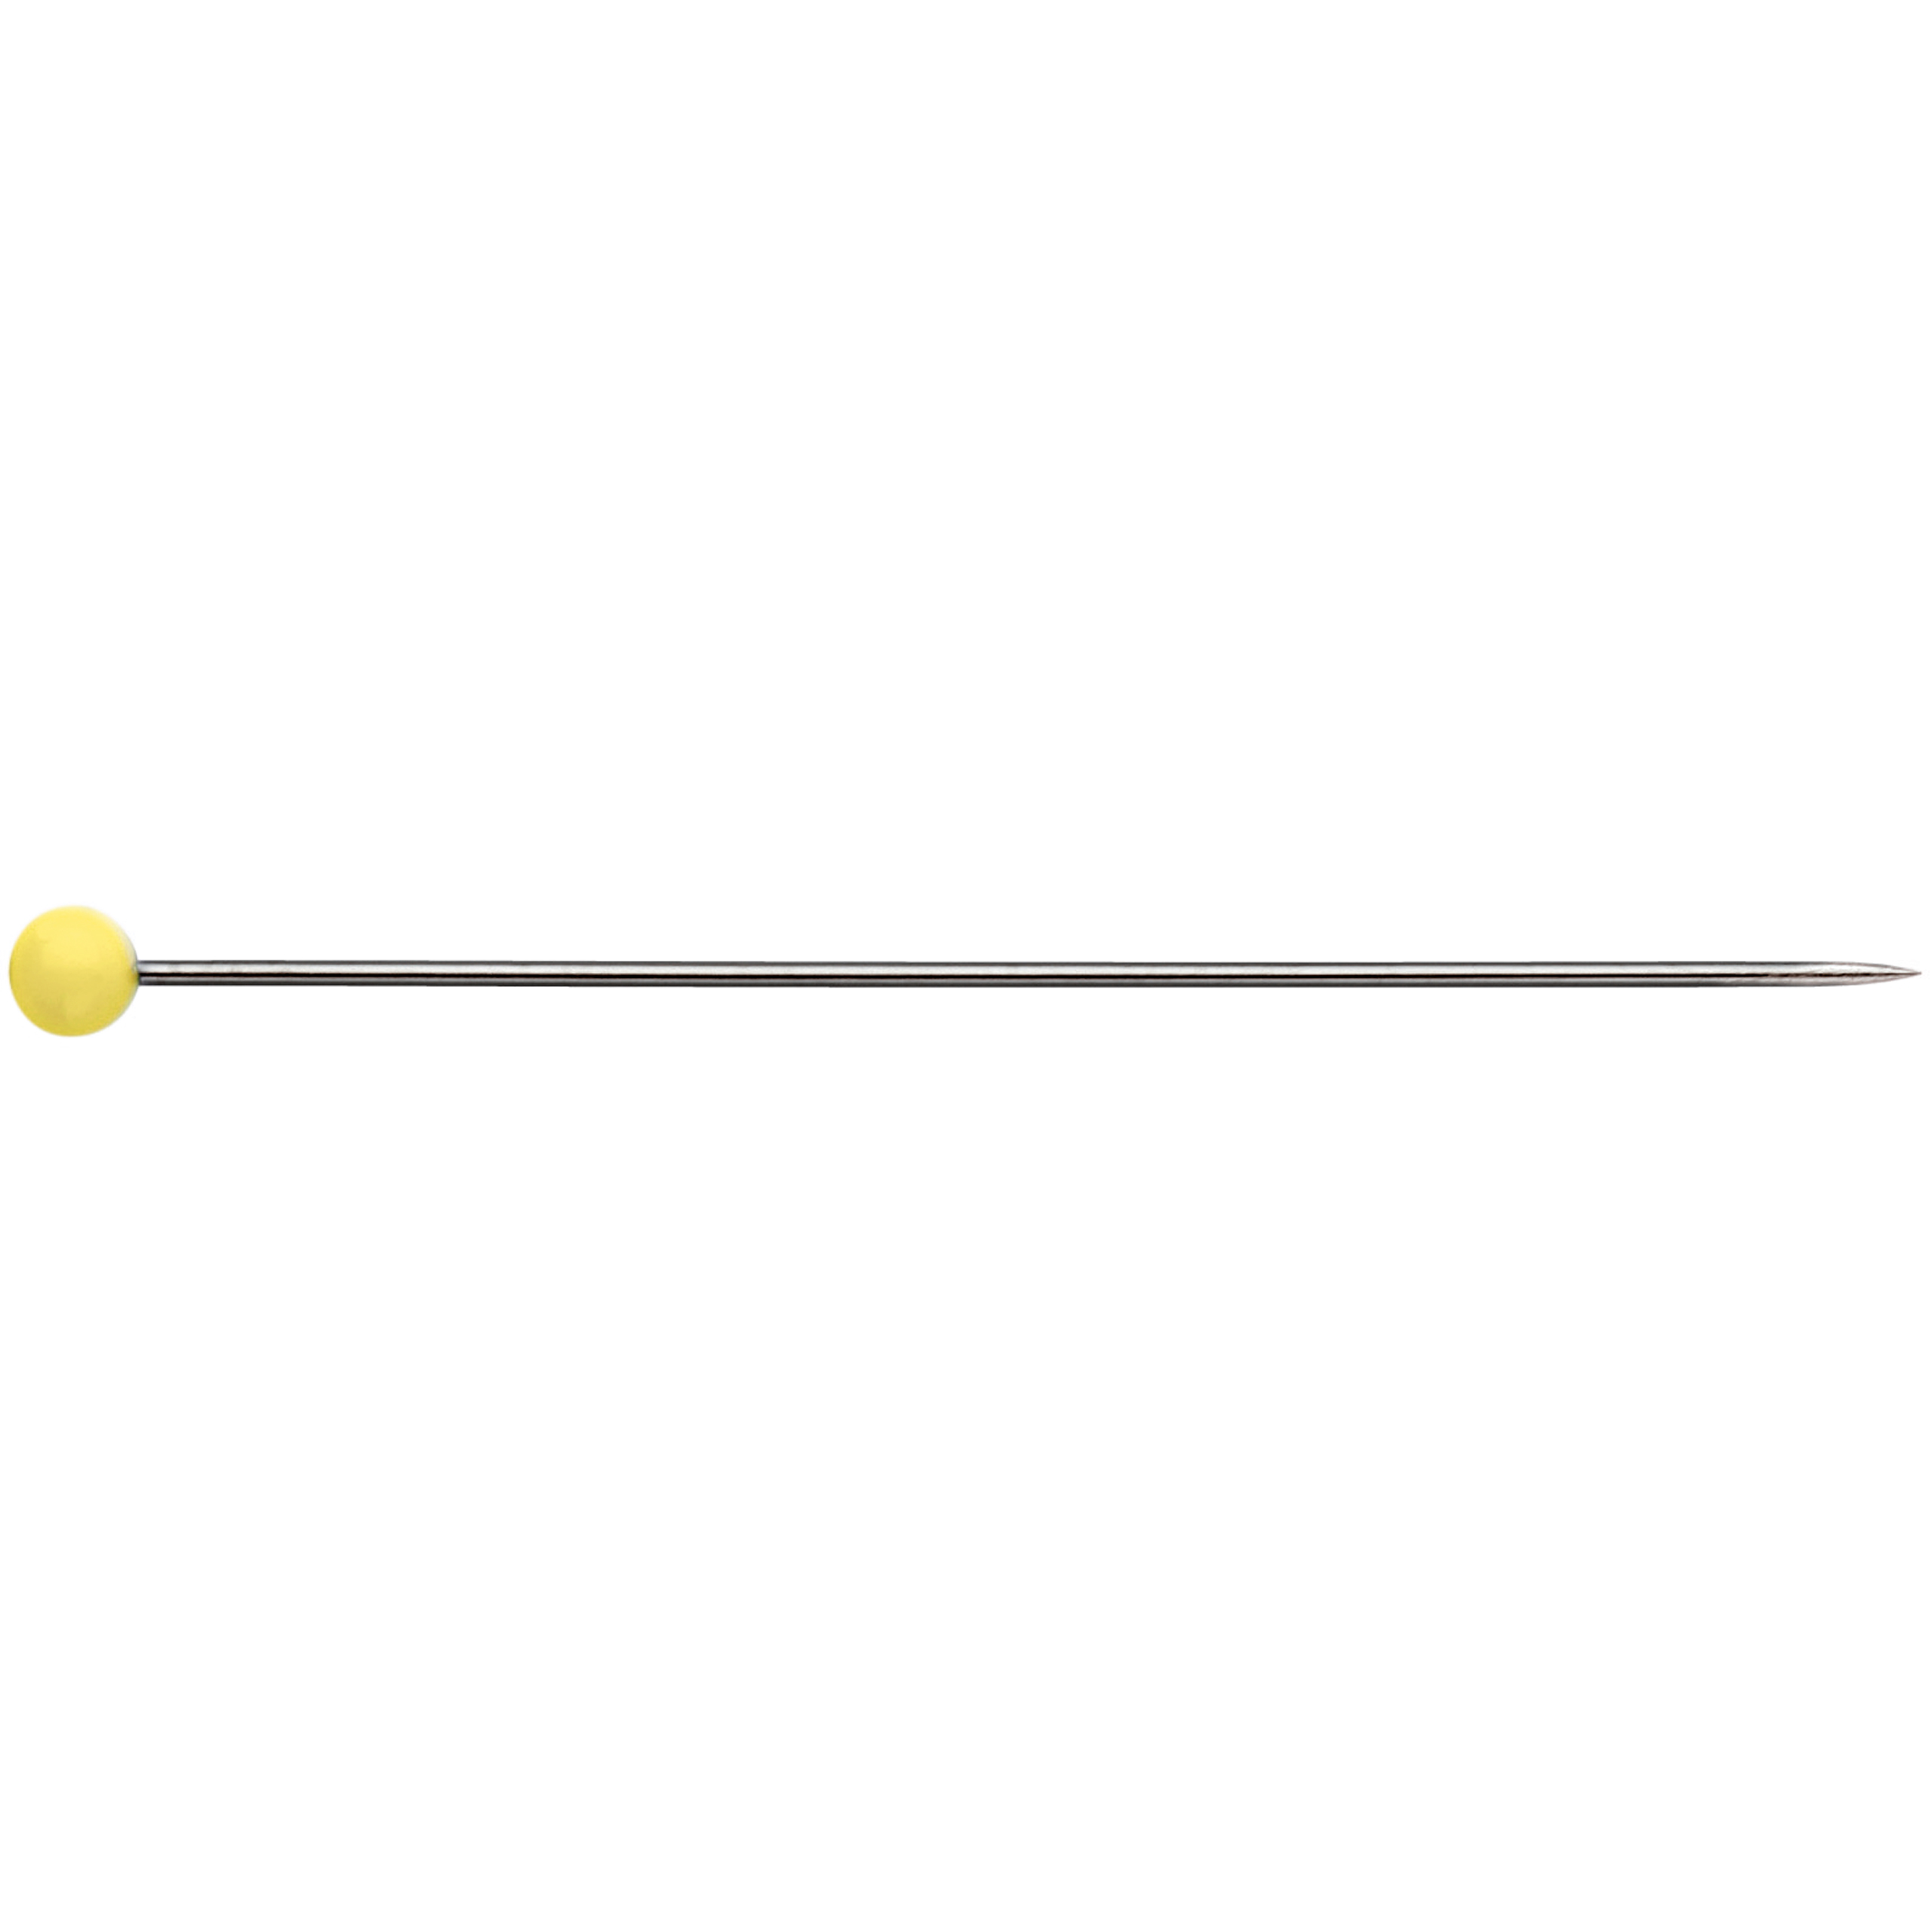 Glass-headed Pins No. 1 extra long yellow 0.60 x 43 mm, 20 g